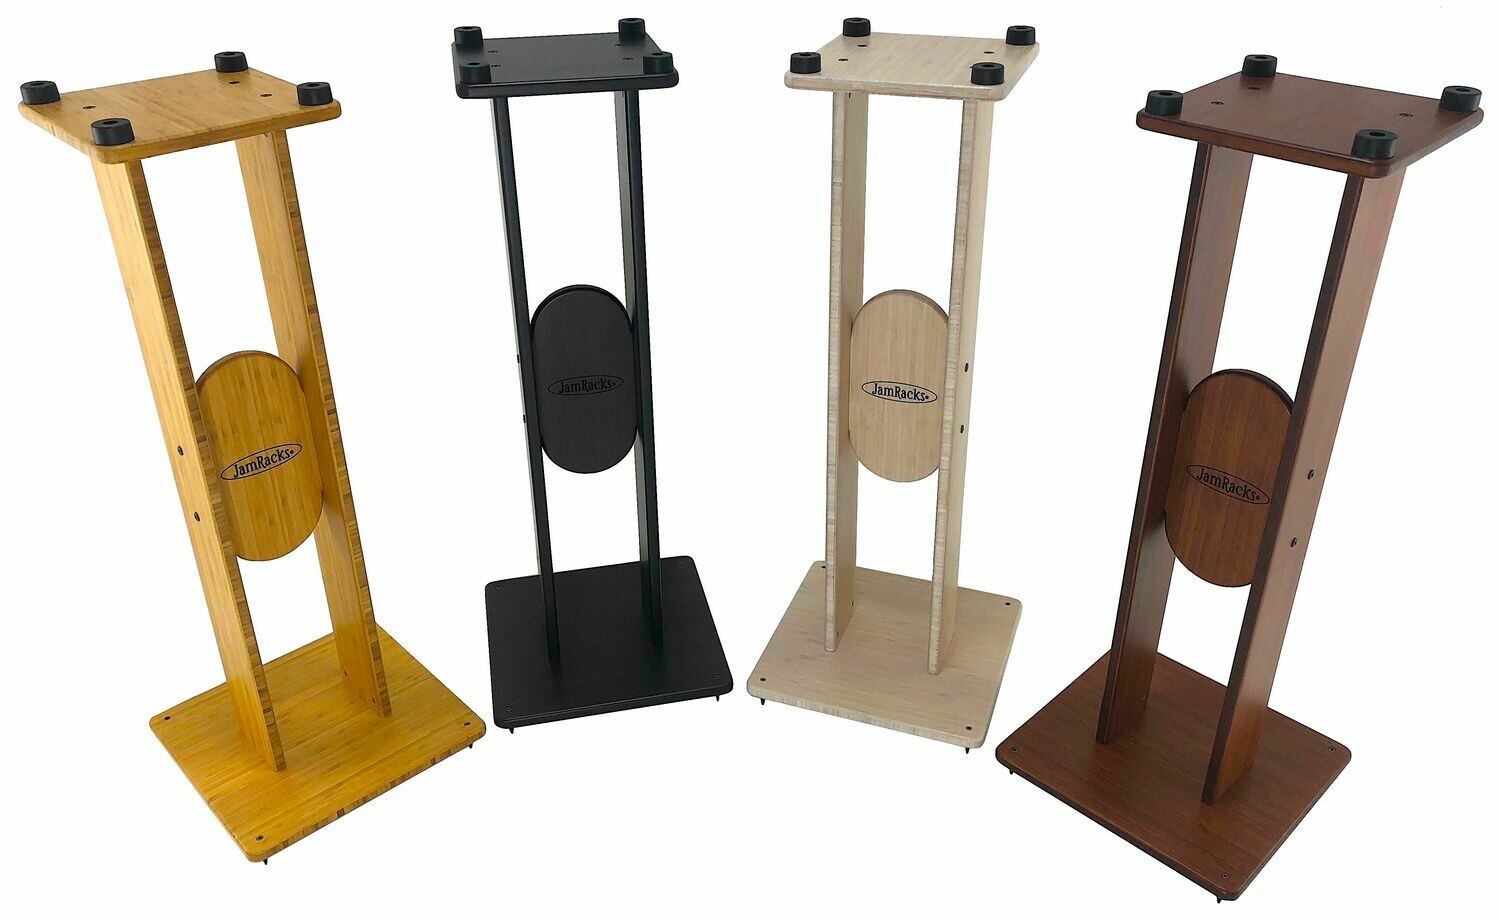 Square stands